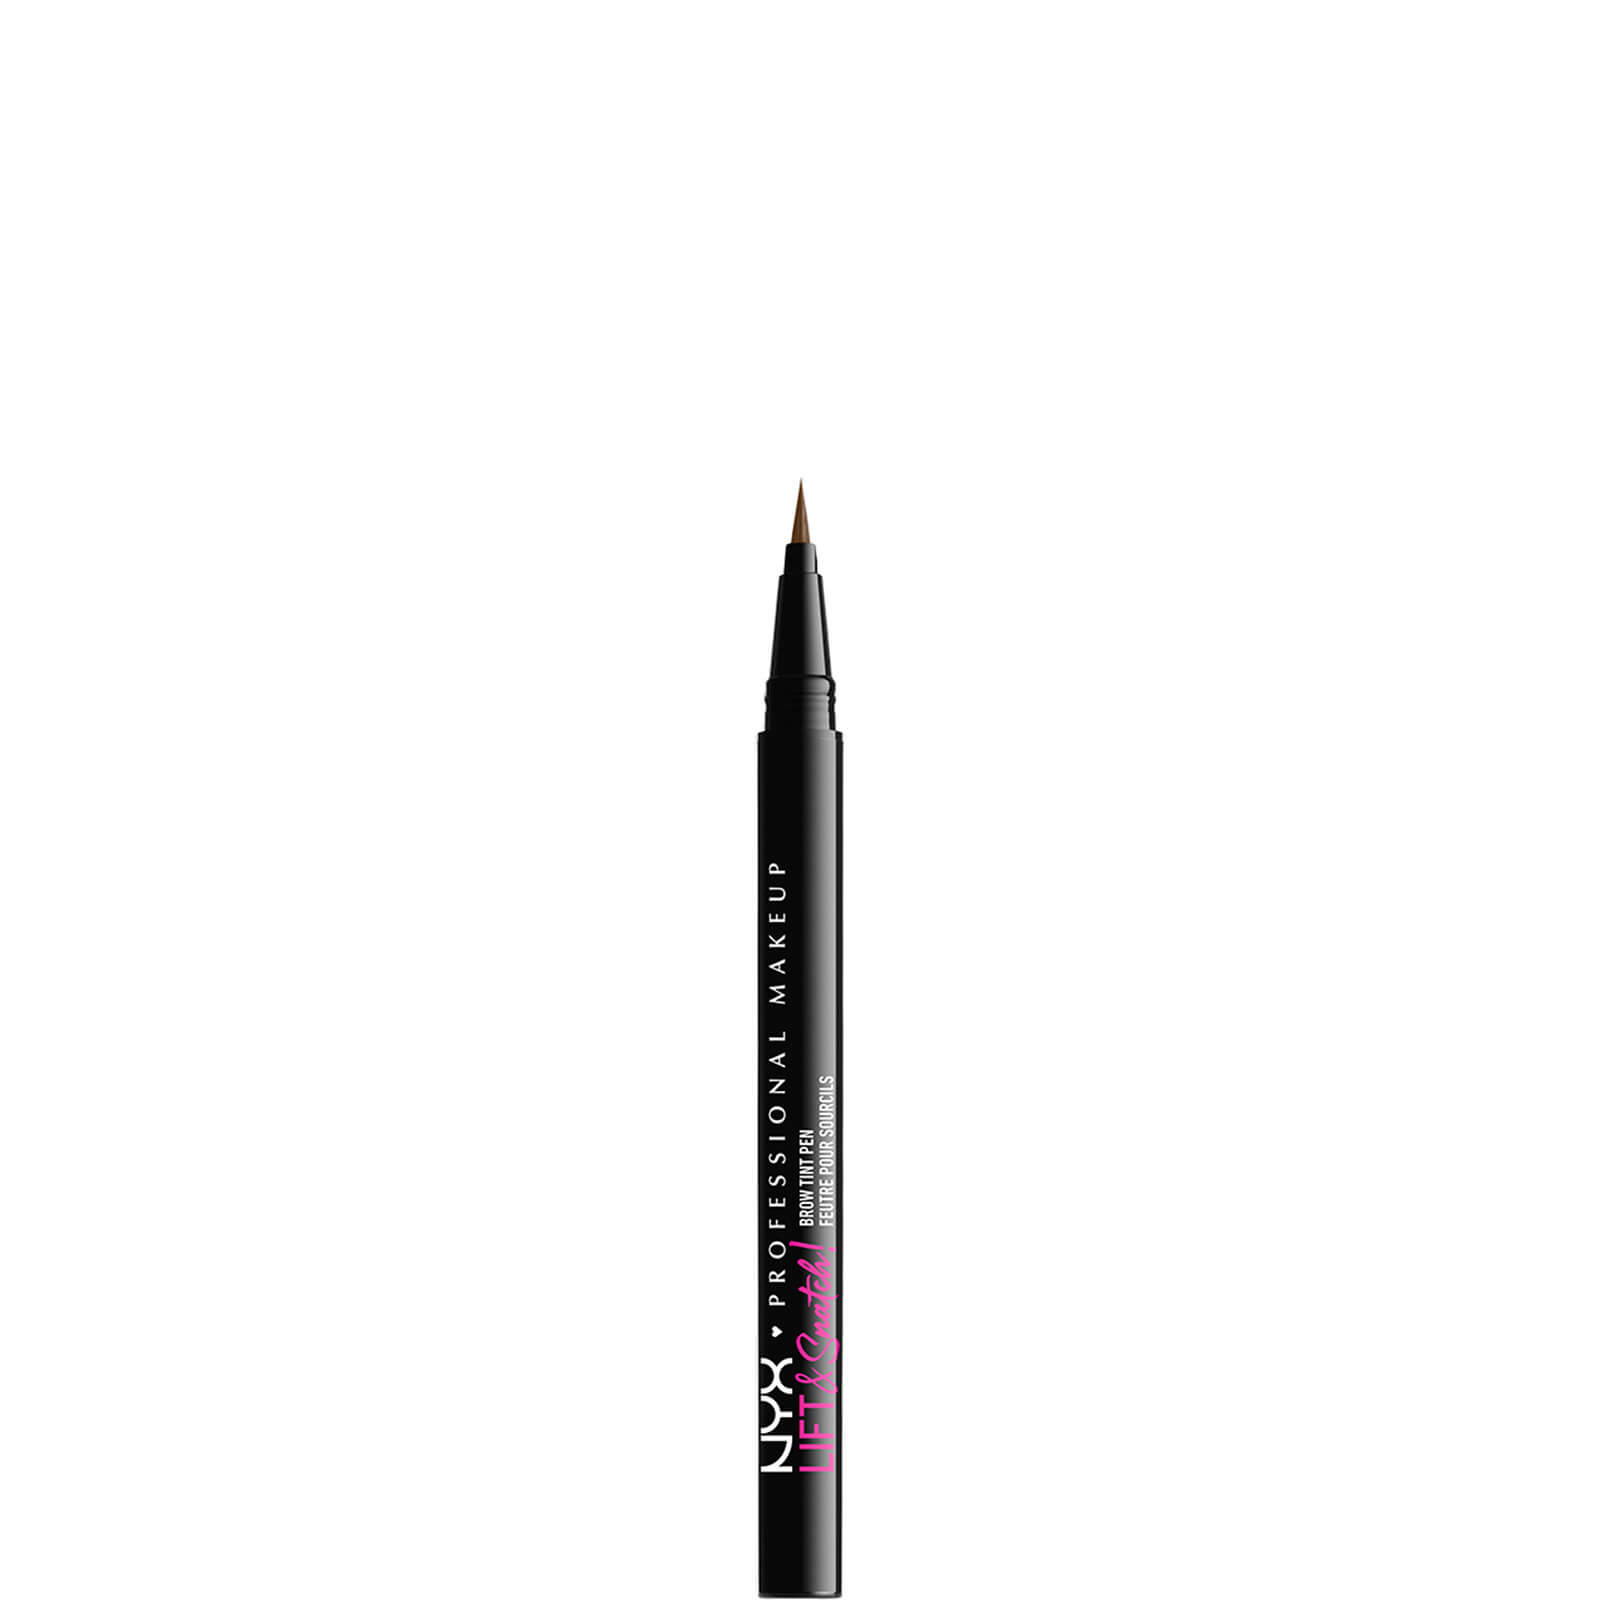 NYX Professional Makeup Lift and Snatch Brow Tint Pen 3g (Various Shades) - Brunette